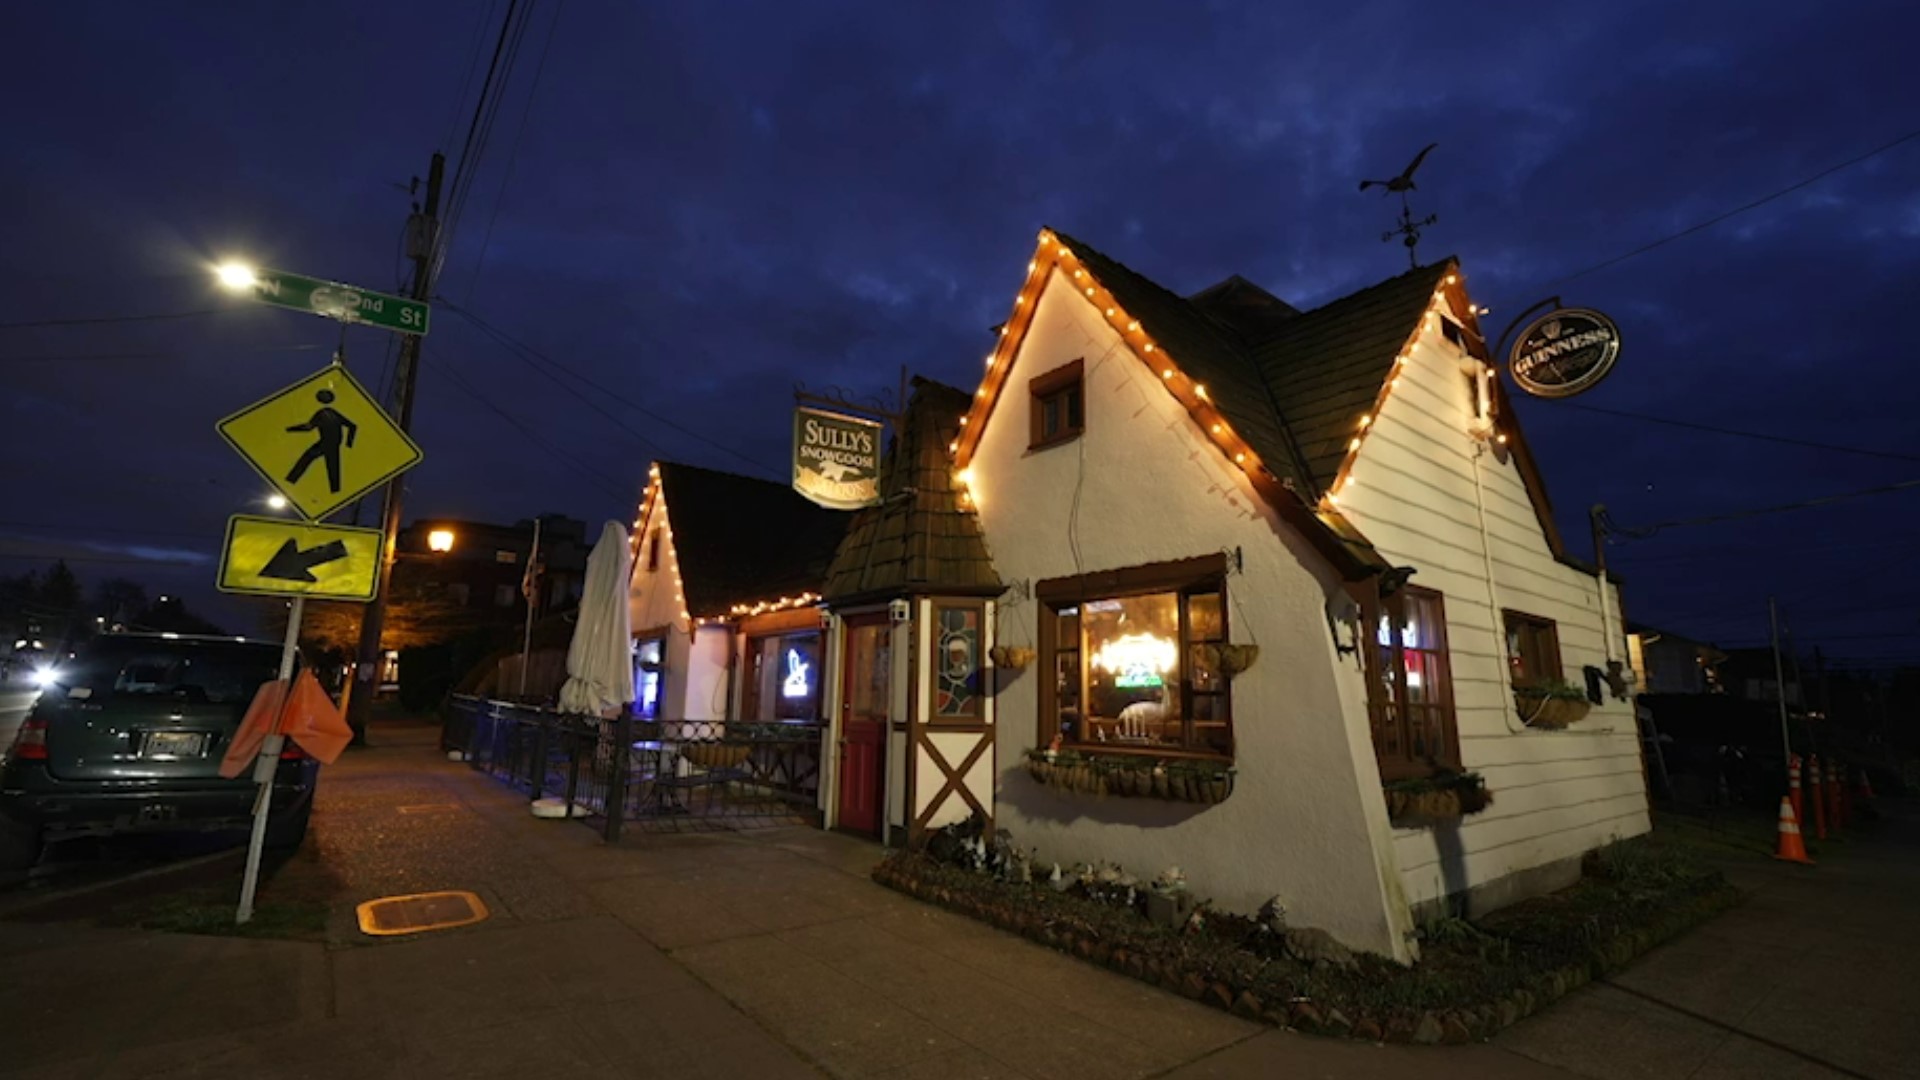 Sully's Snowgoose Saloon serves cold beer and warm vibes from a century-old building. #k5evening